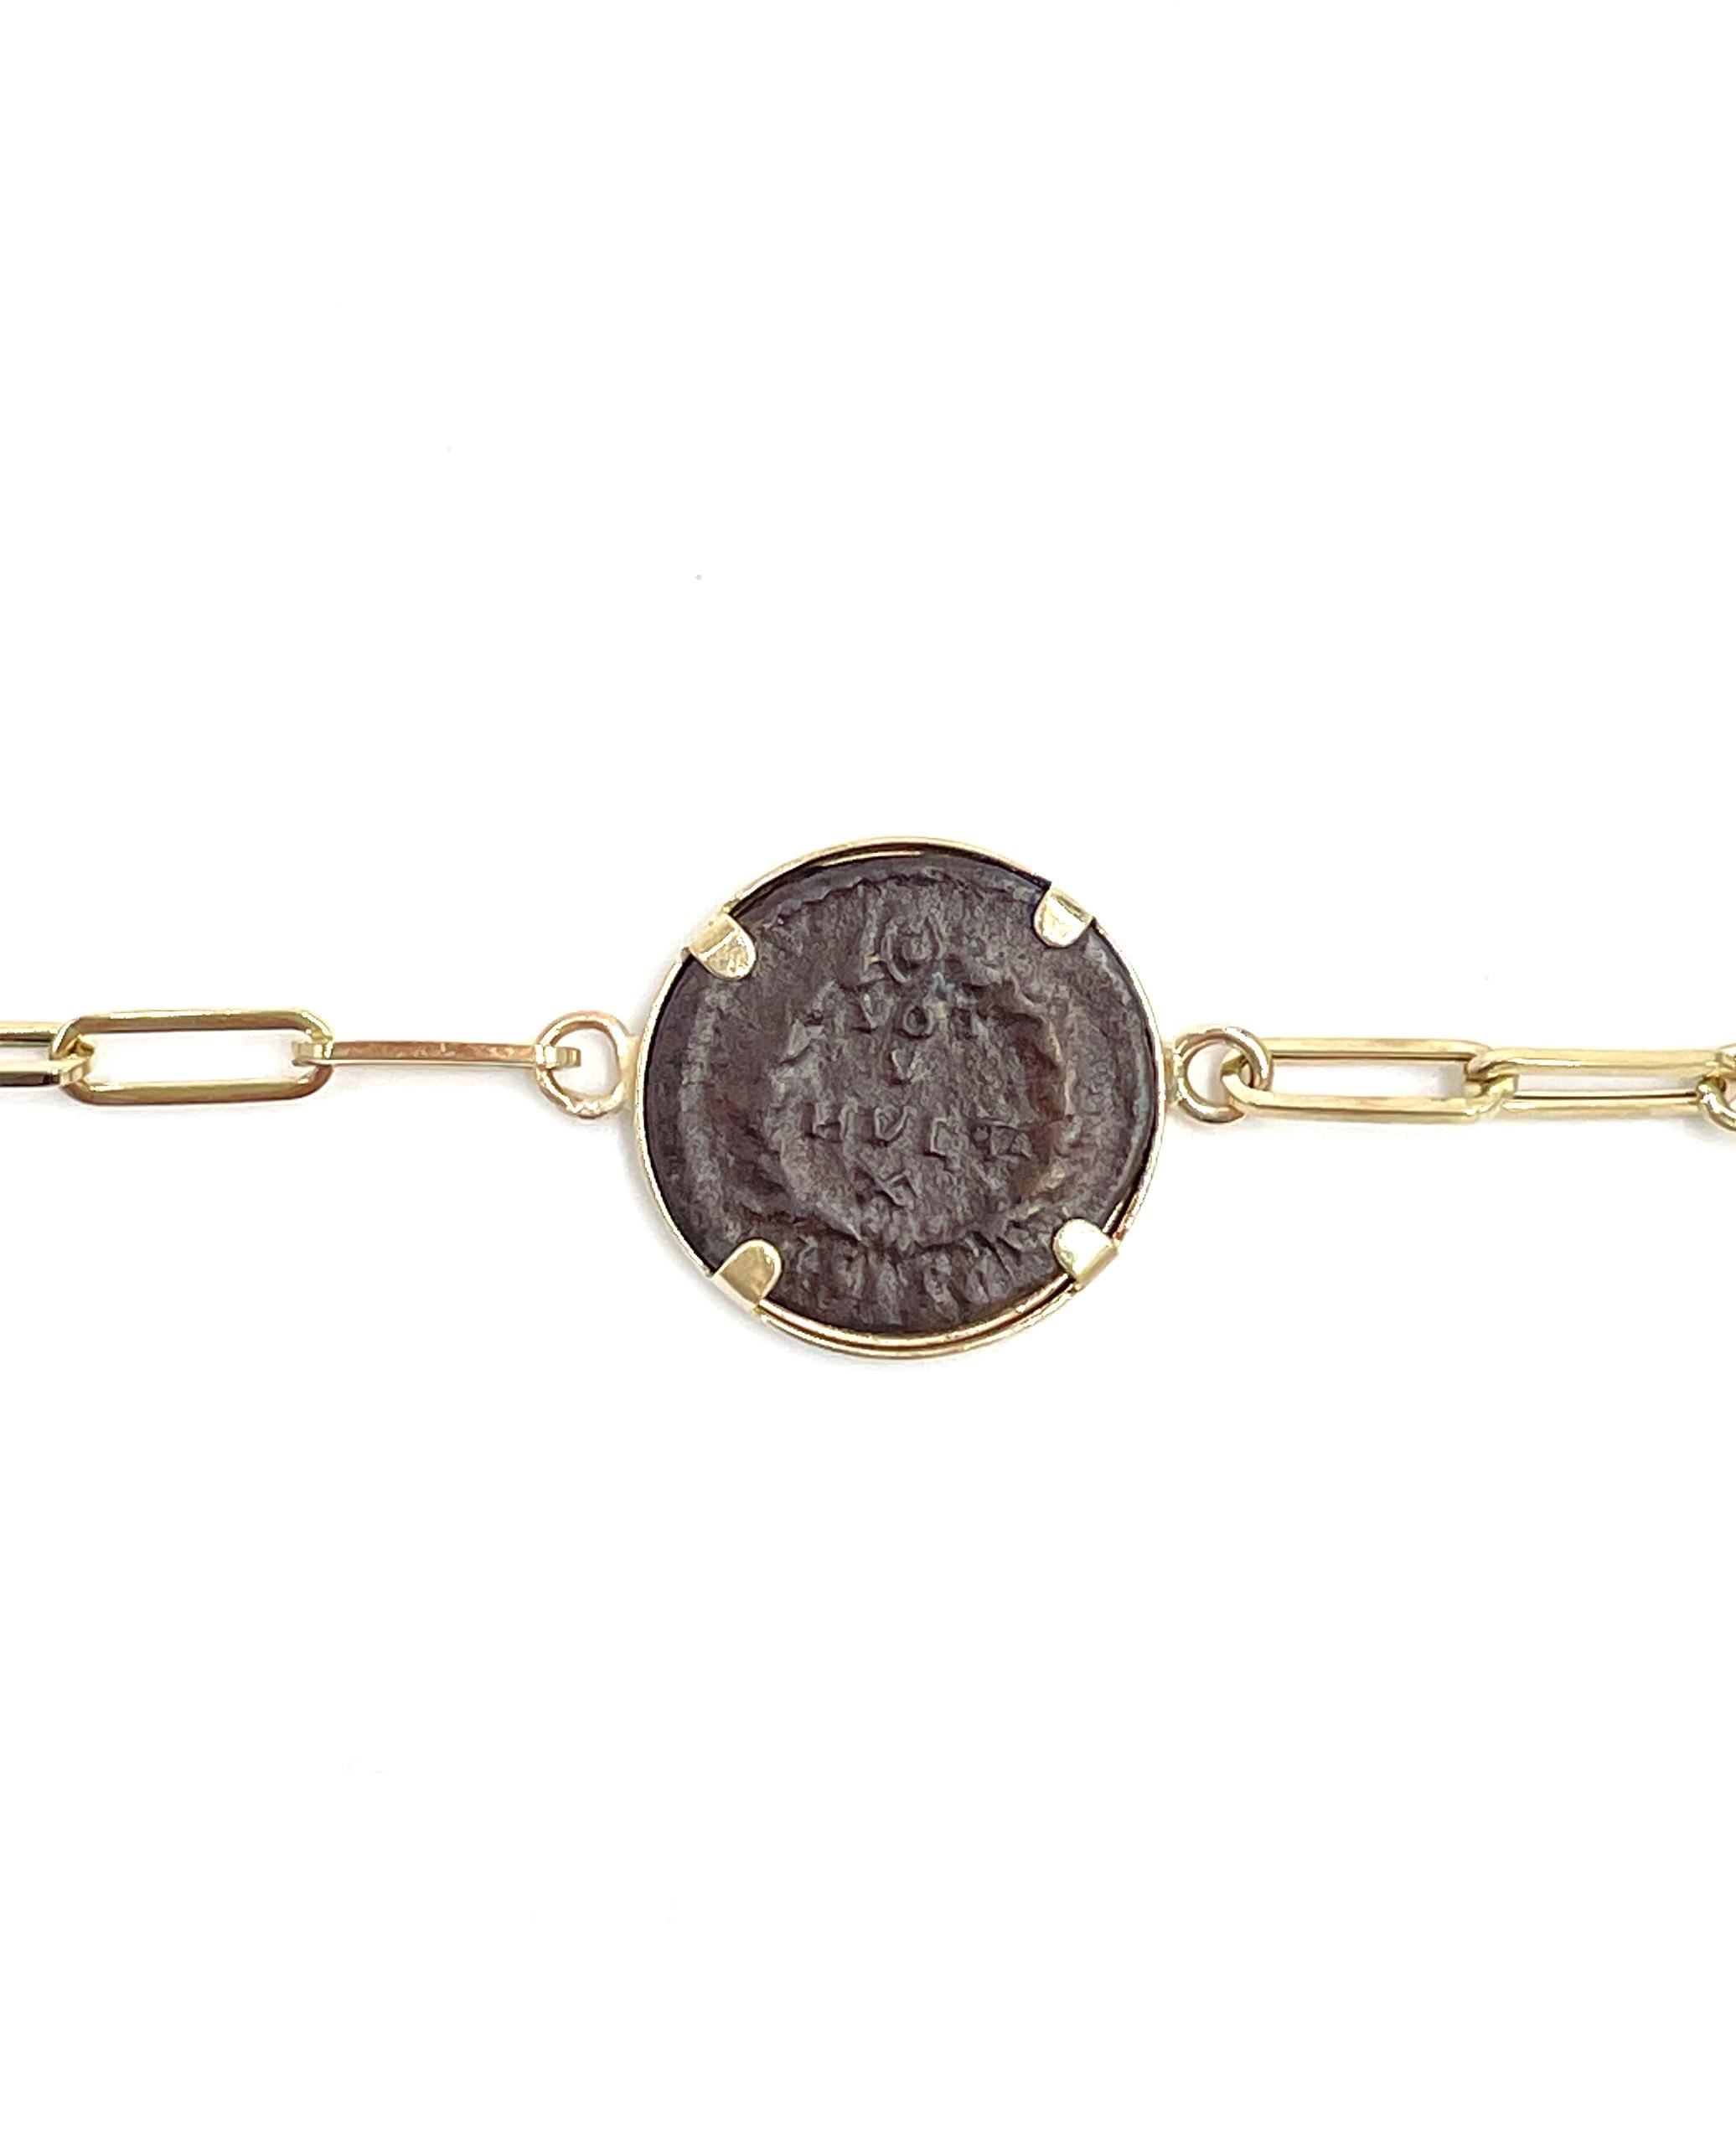 Contemporary 14K Yellow Gold Paperclip Bracelet with Replica Roman Coin For Sale